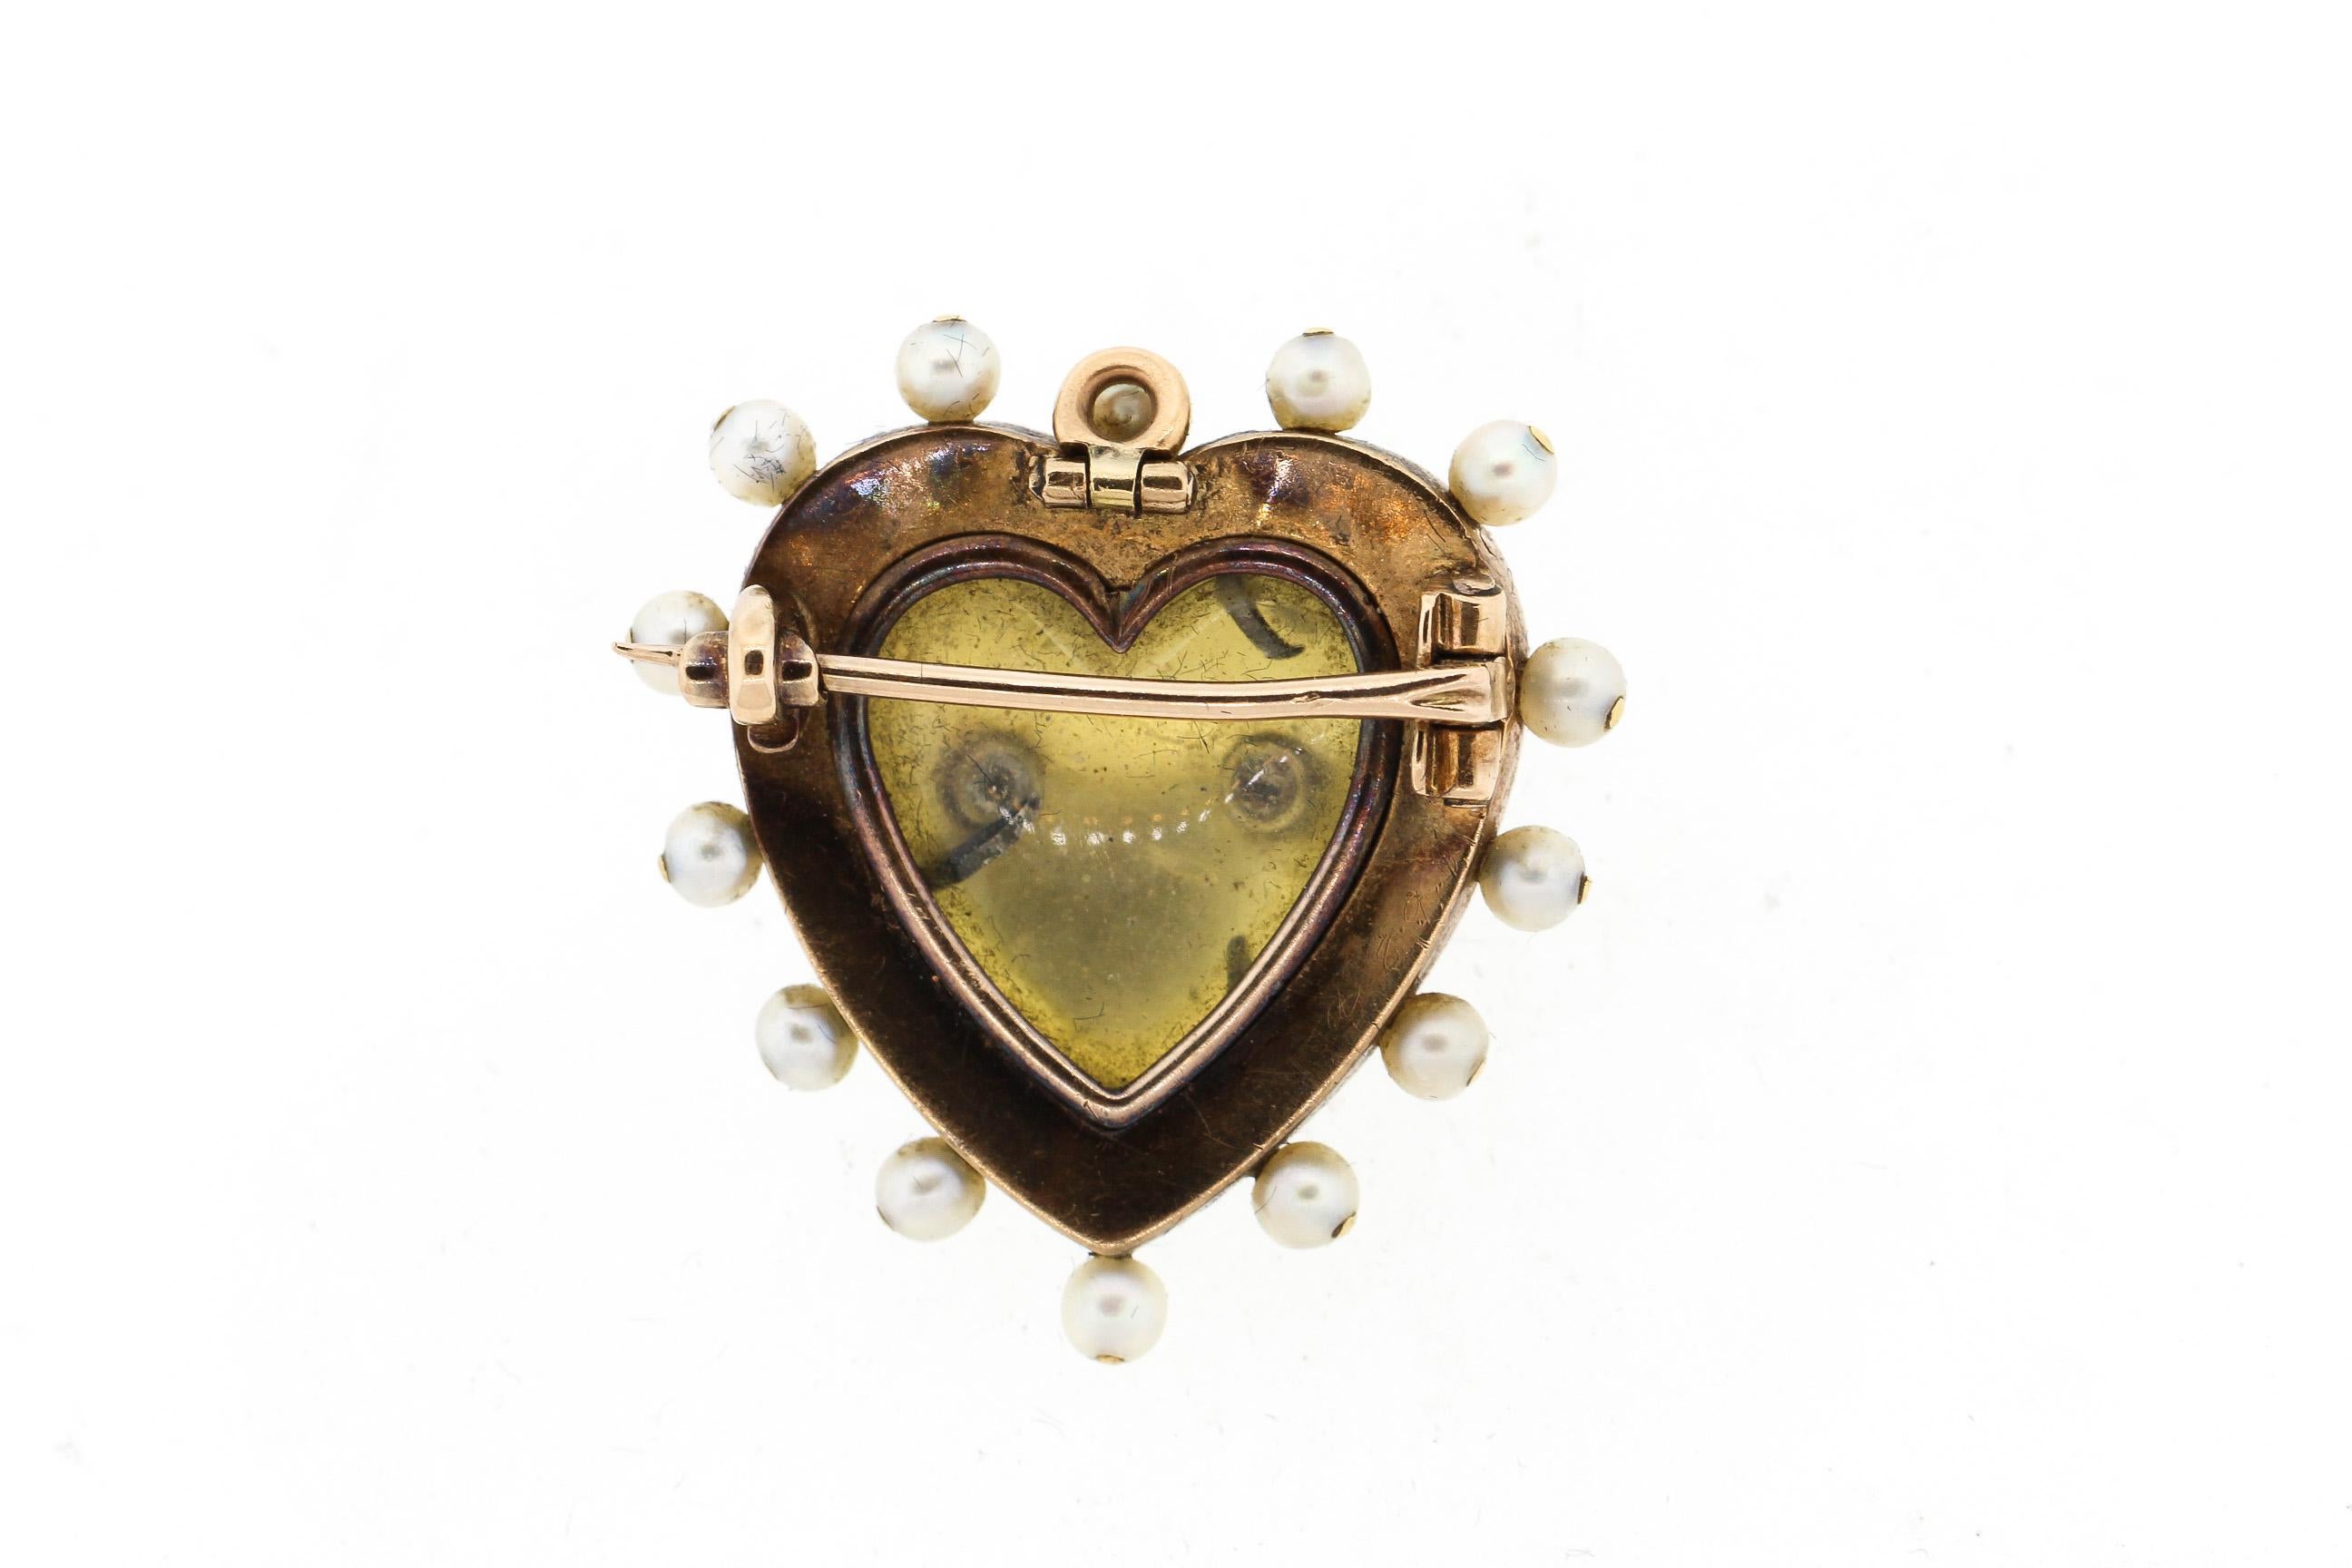 A bright antique 18k gold green and white enamel heart pin/pendant set with rosecut diamonds and pearls. The front of the pin has two pearls surrounded by diamonds in a double heart shape. Such a classic sentimental Victorian design. The green